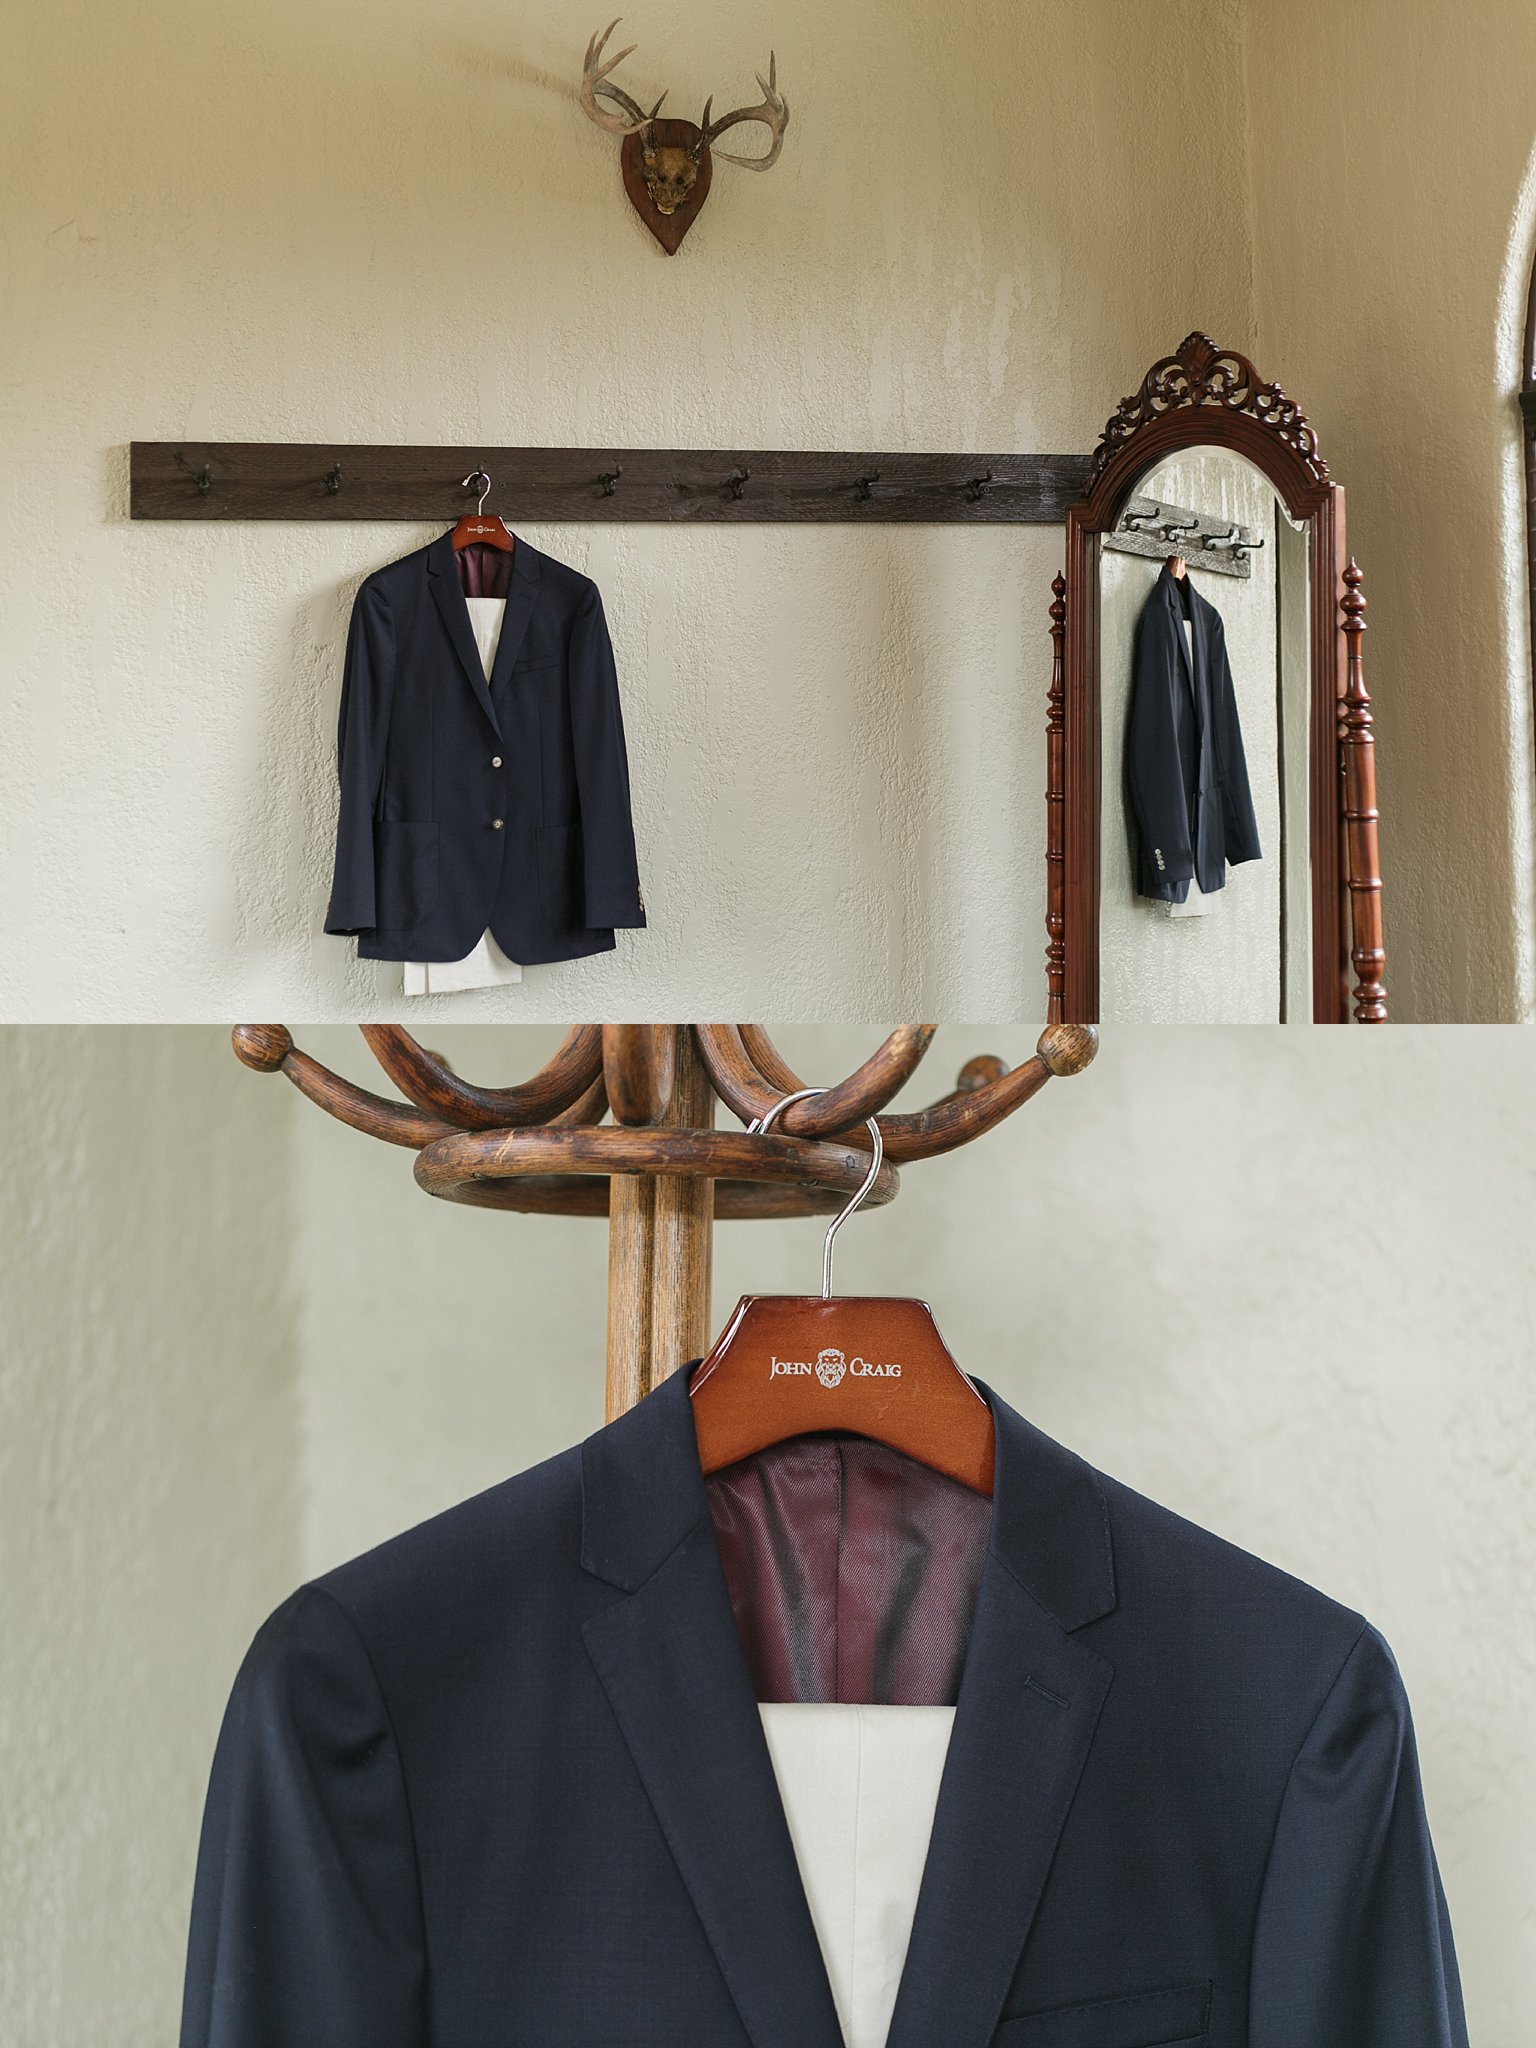 Coat hanging in the Groom's room at the Howey Mansion